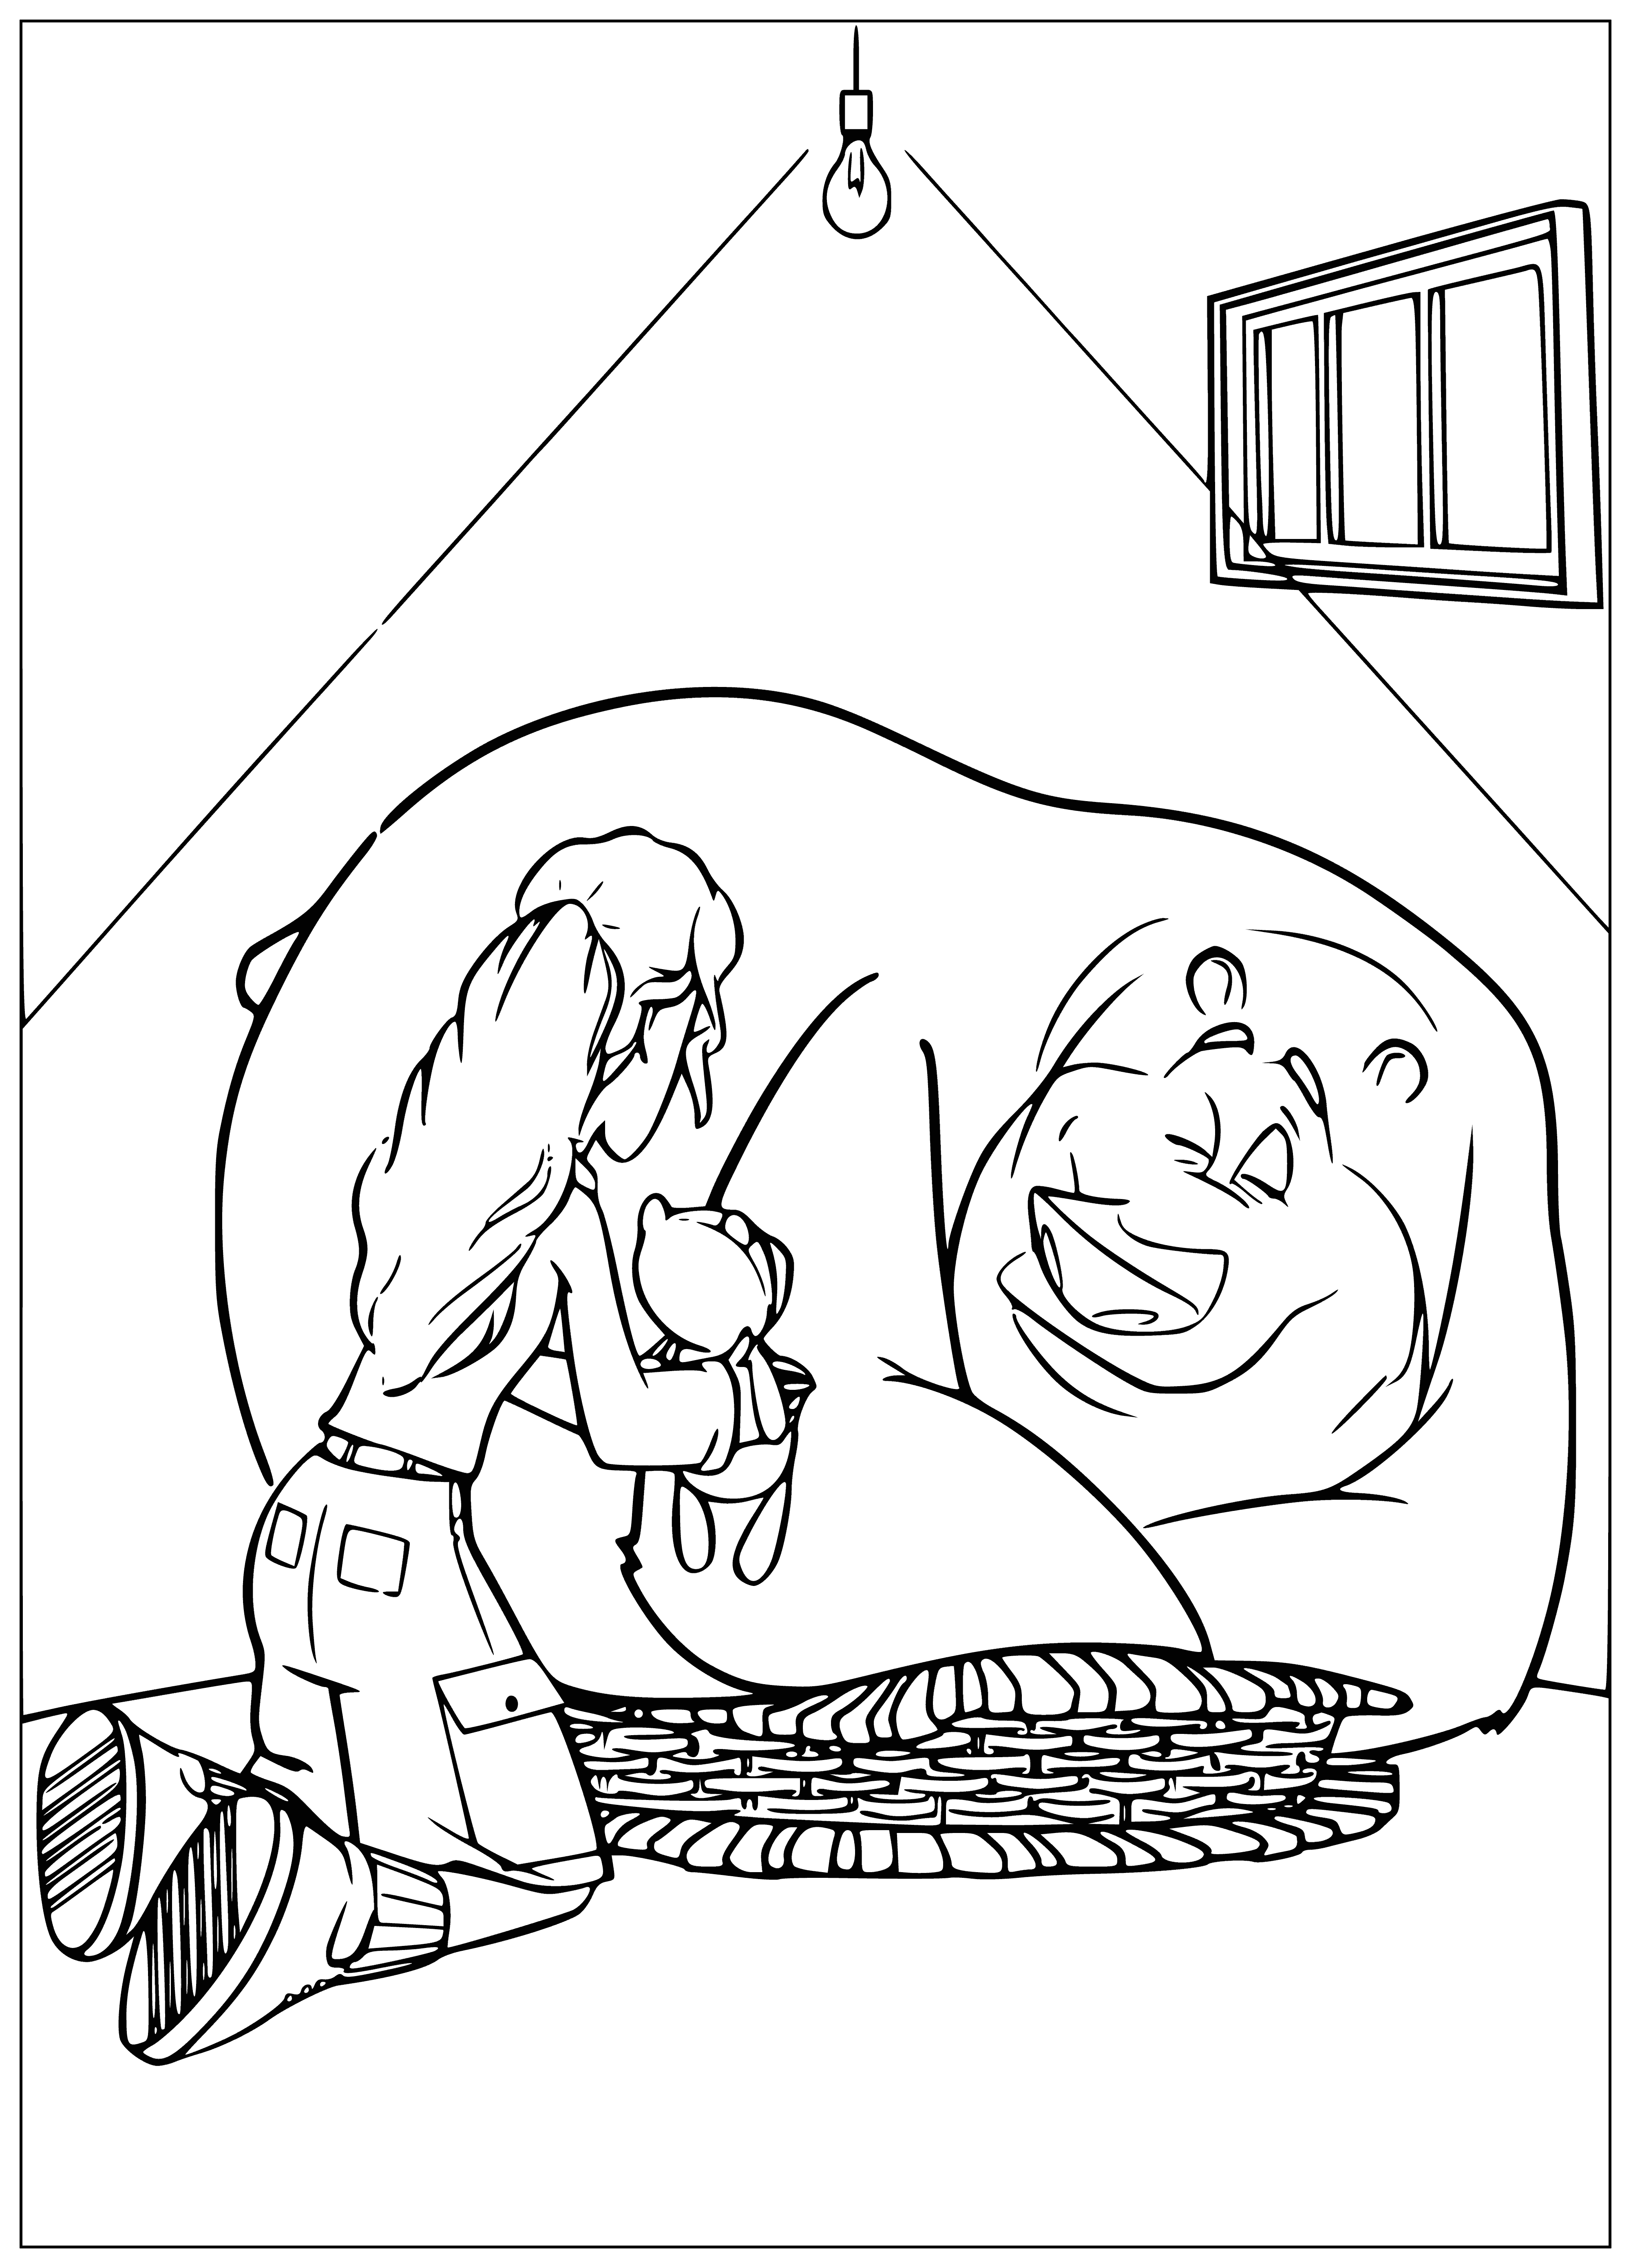 coloring page: Boog is happily holding a scared small bear in a forest, trees and bushes all around them.